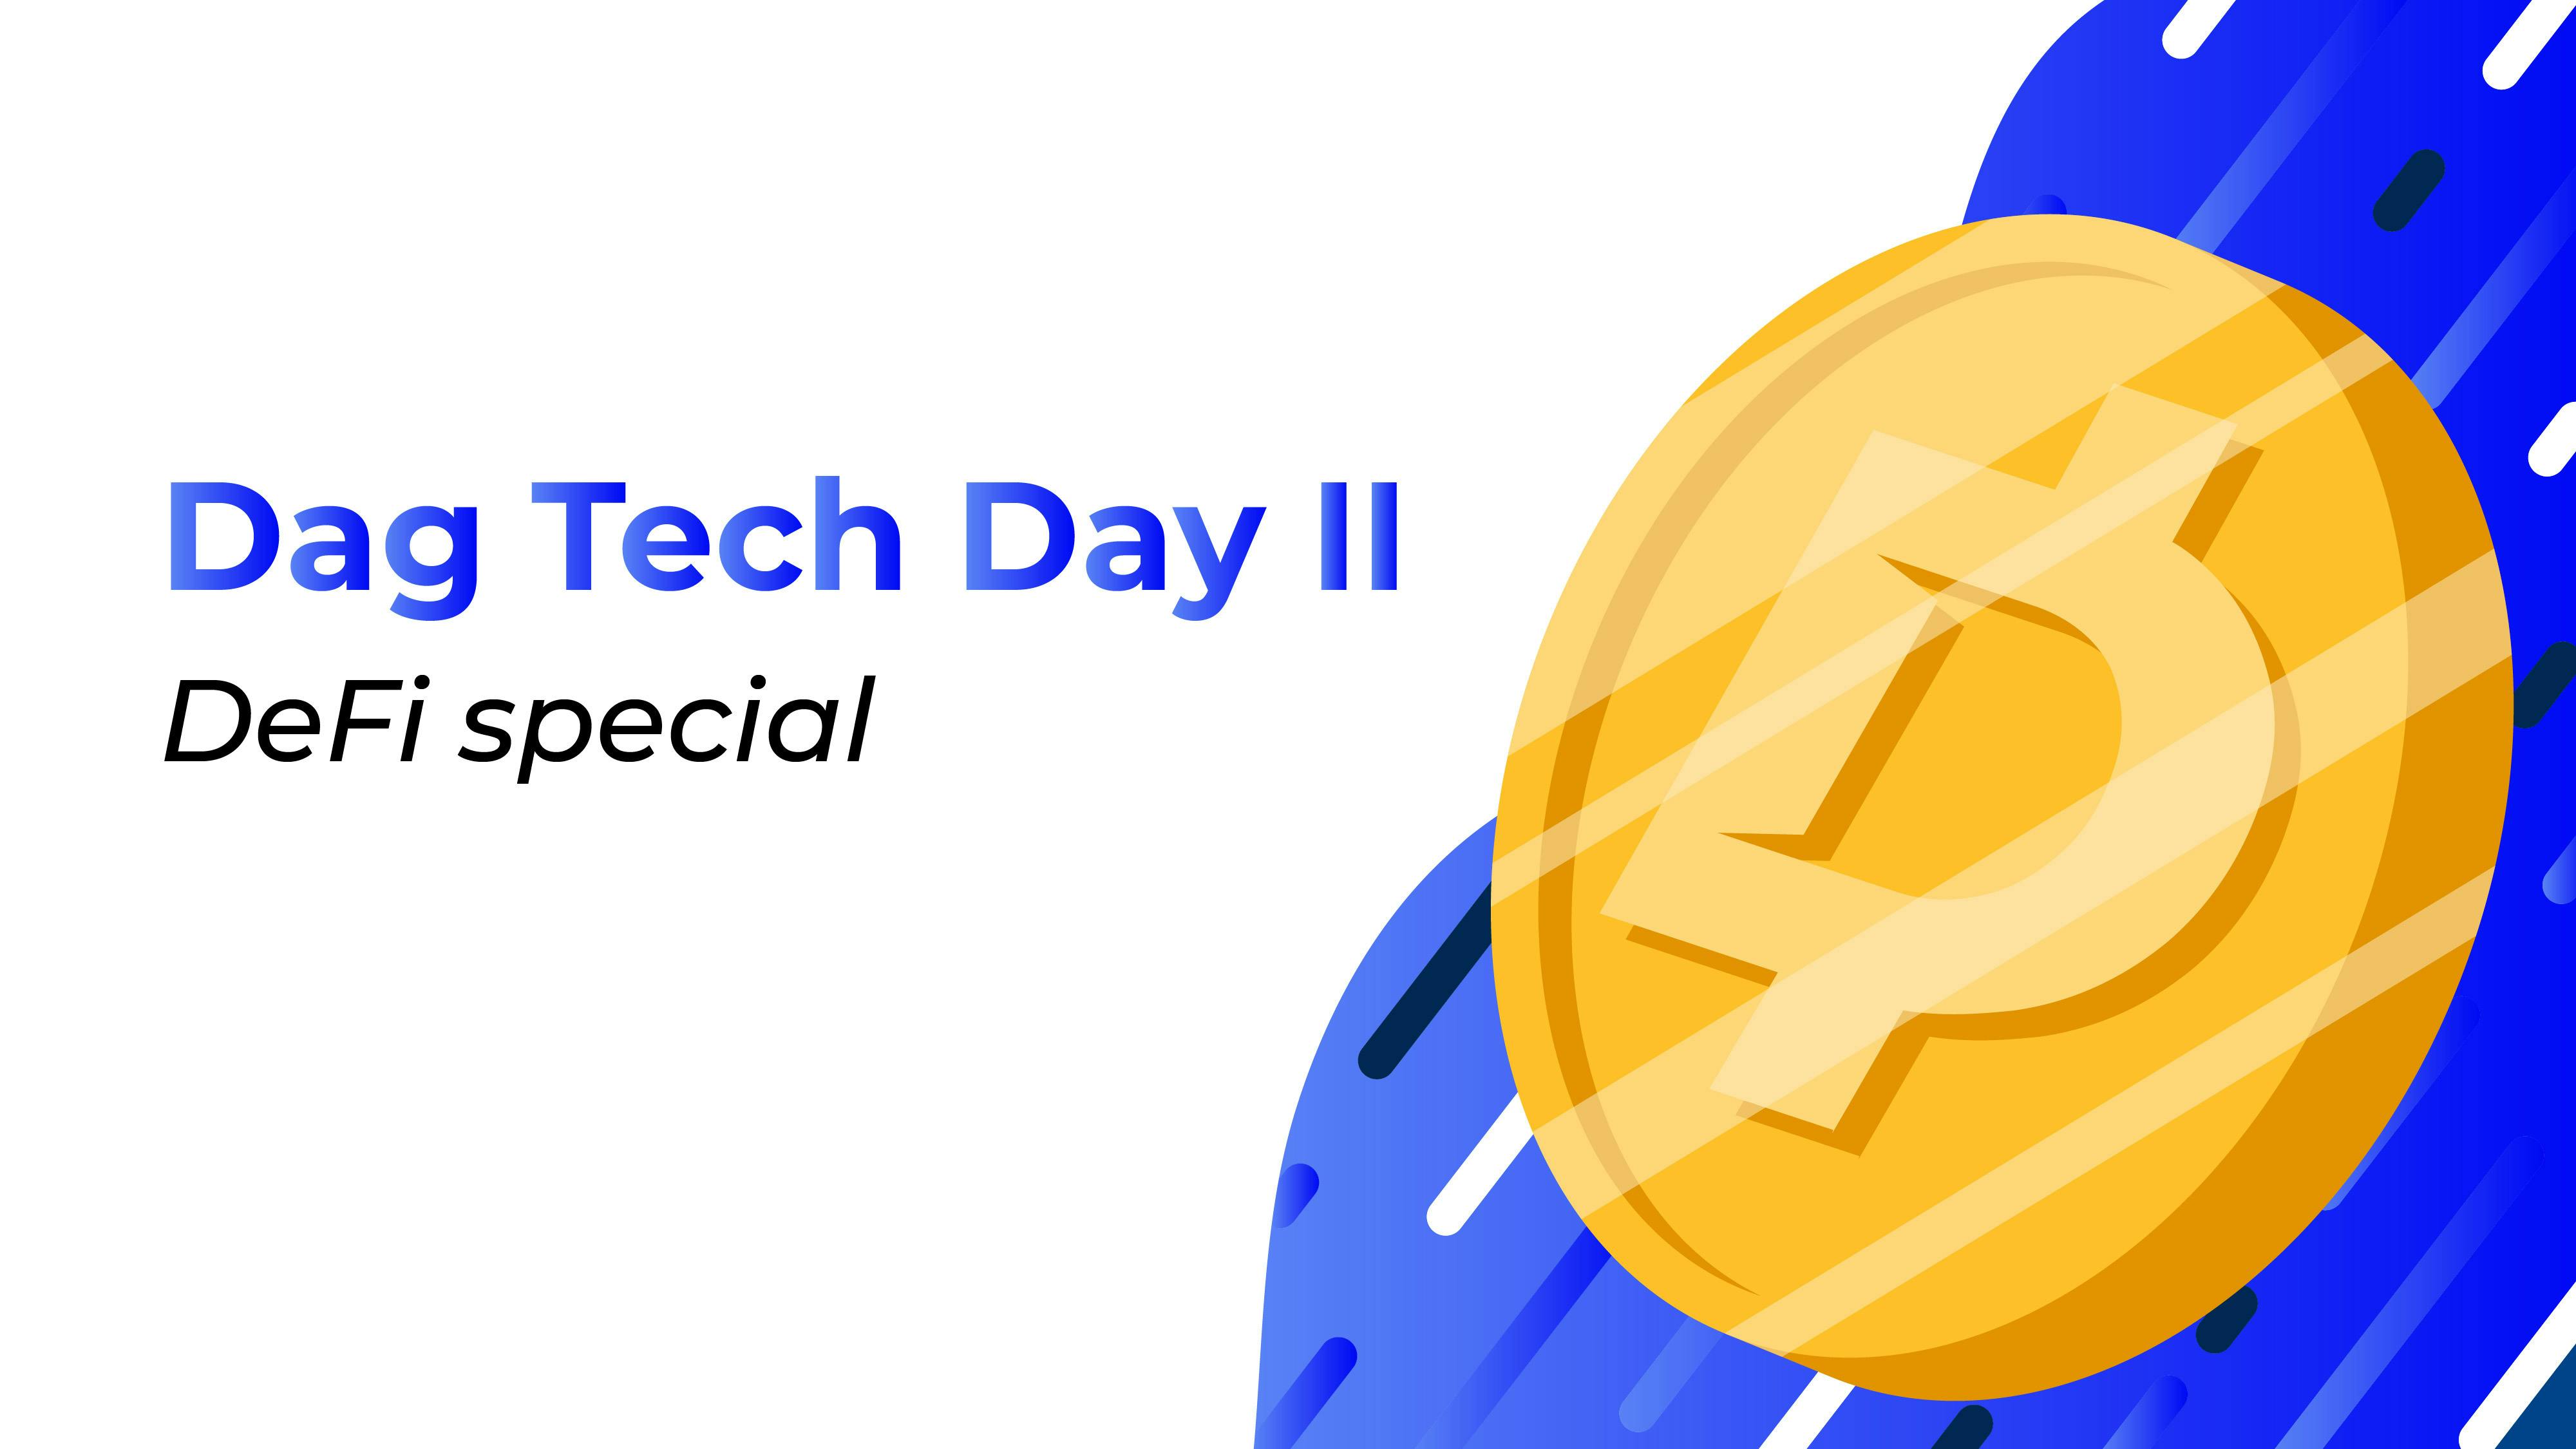 Dag Tech Day II: the things you need to know about DeFi